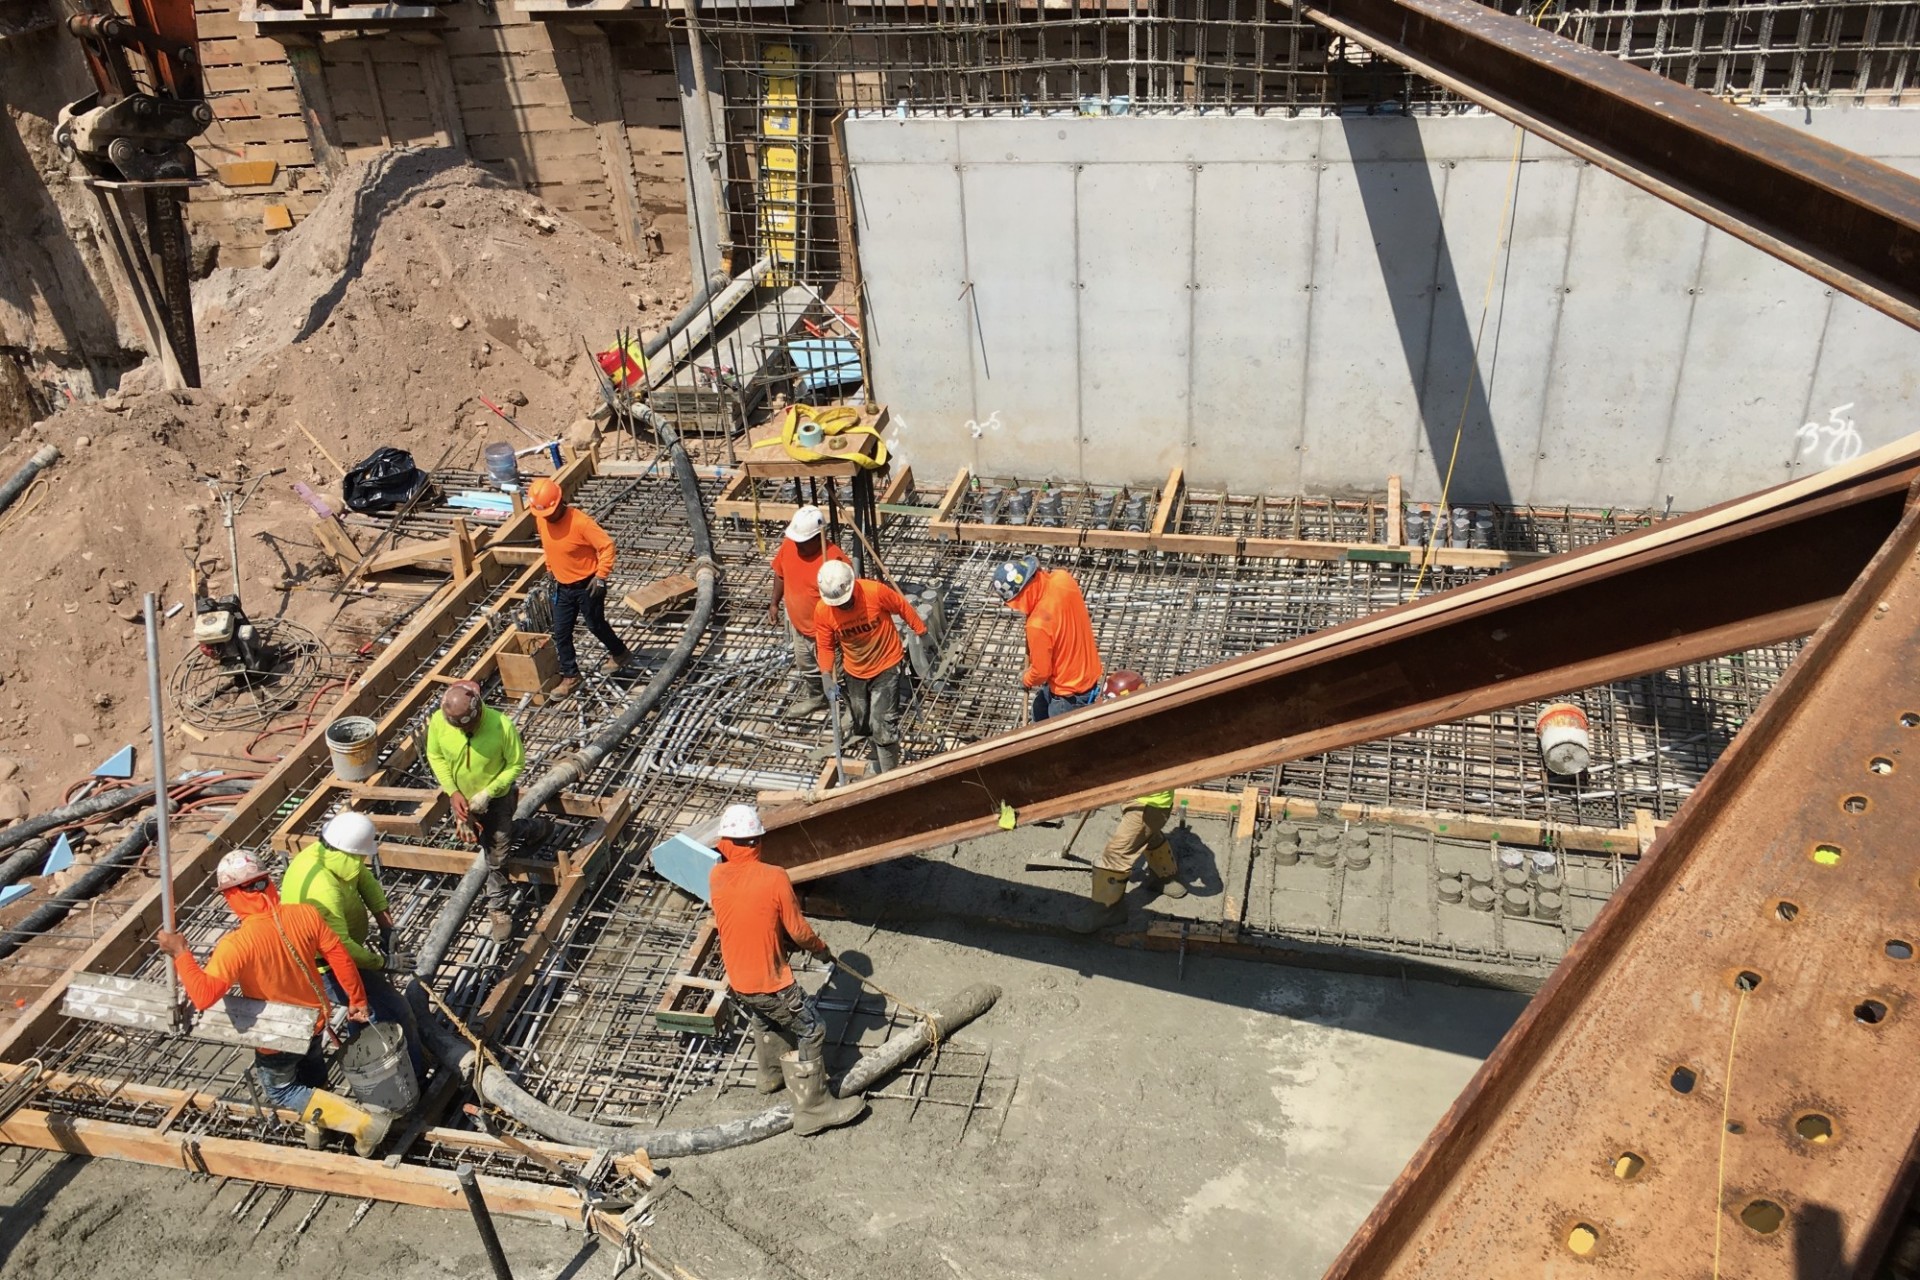 A view of the 600 W. 125th Street construction site with rebars along the perimeter of the northern portion of the site with steel beams overhead.